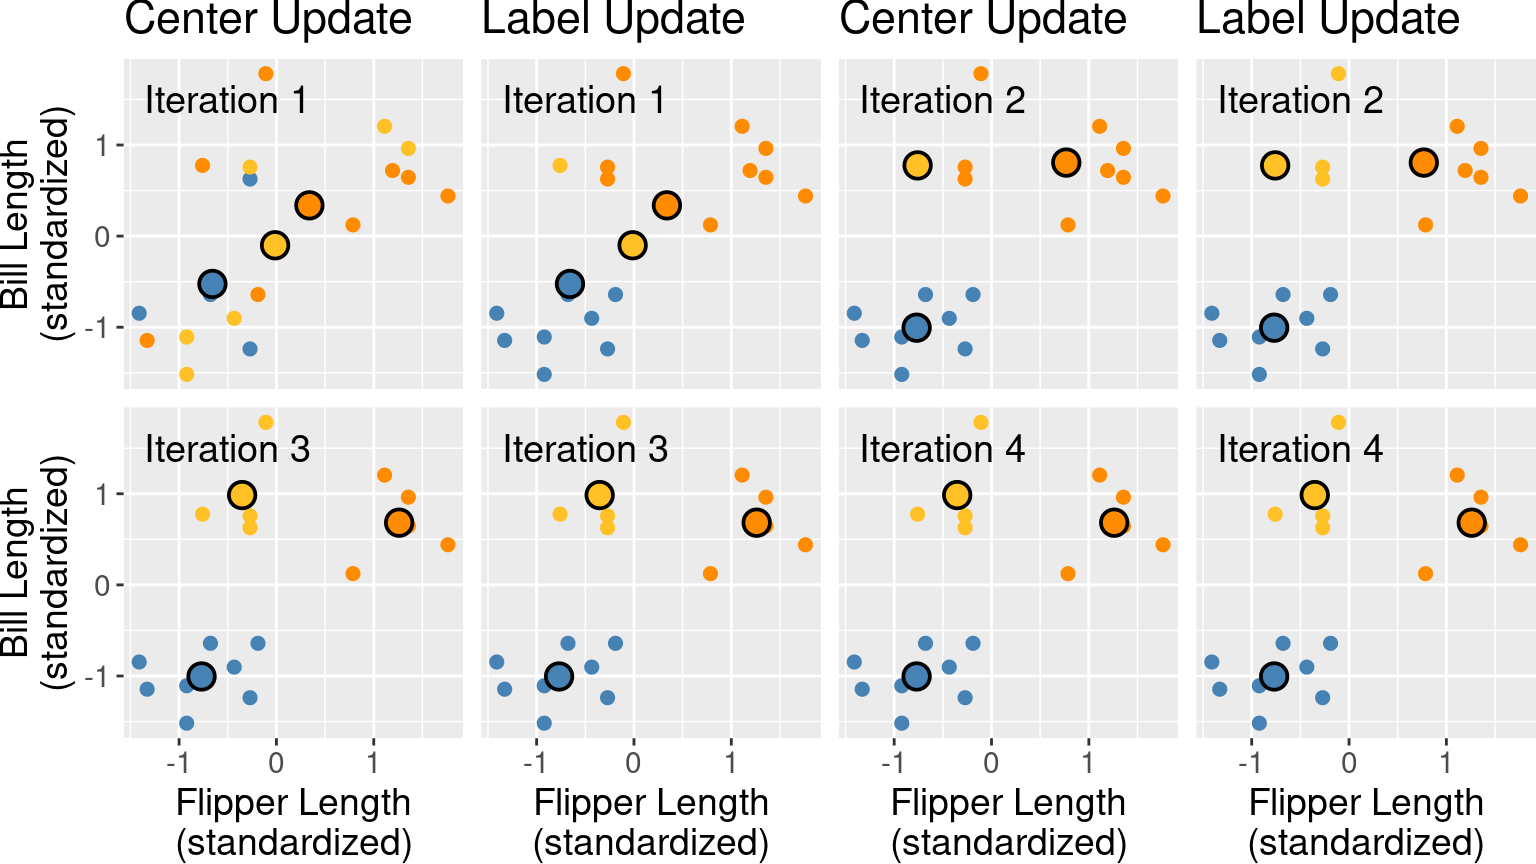 First four iterations of K-means clustering on the penguin_data example data set. Each pair of plots corresponds to an iteration. Within the pair, the first plot depicts the center update, and the second plot depicts the reassignment of data to clusters. Cluster centers are indicated by larger points that are outlined in black.